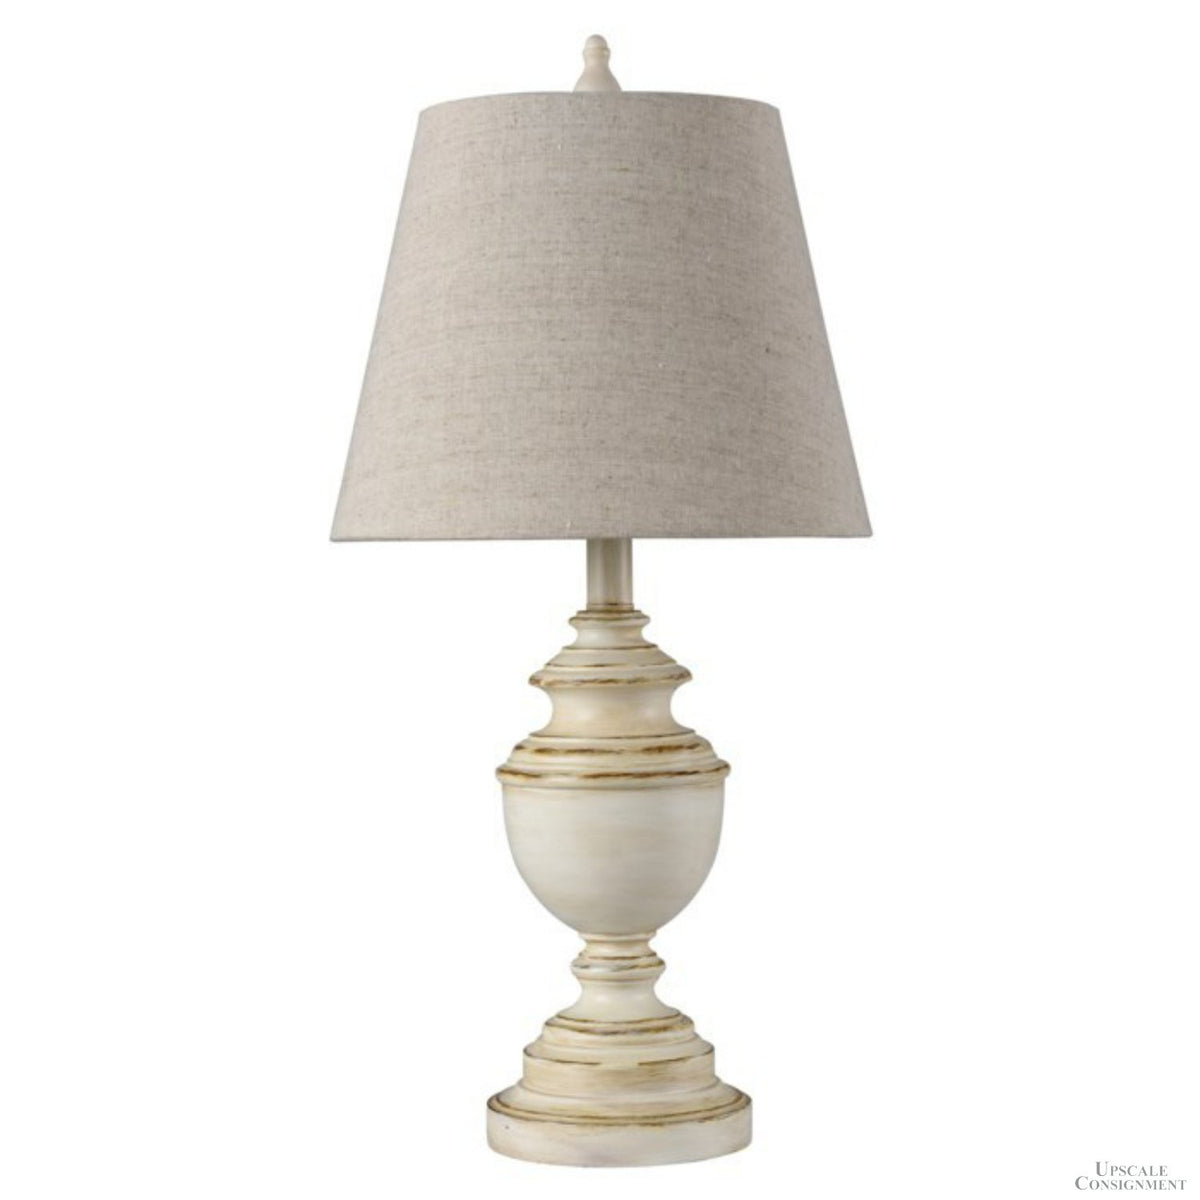 Table Lamp w/Distressed White Finish